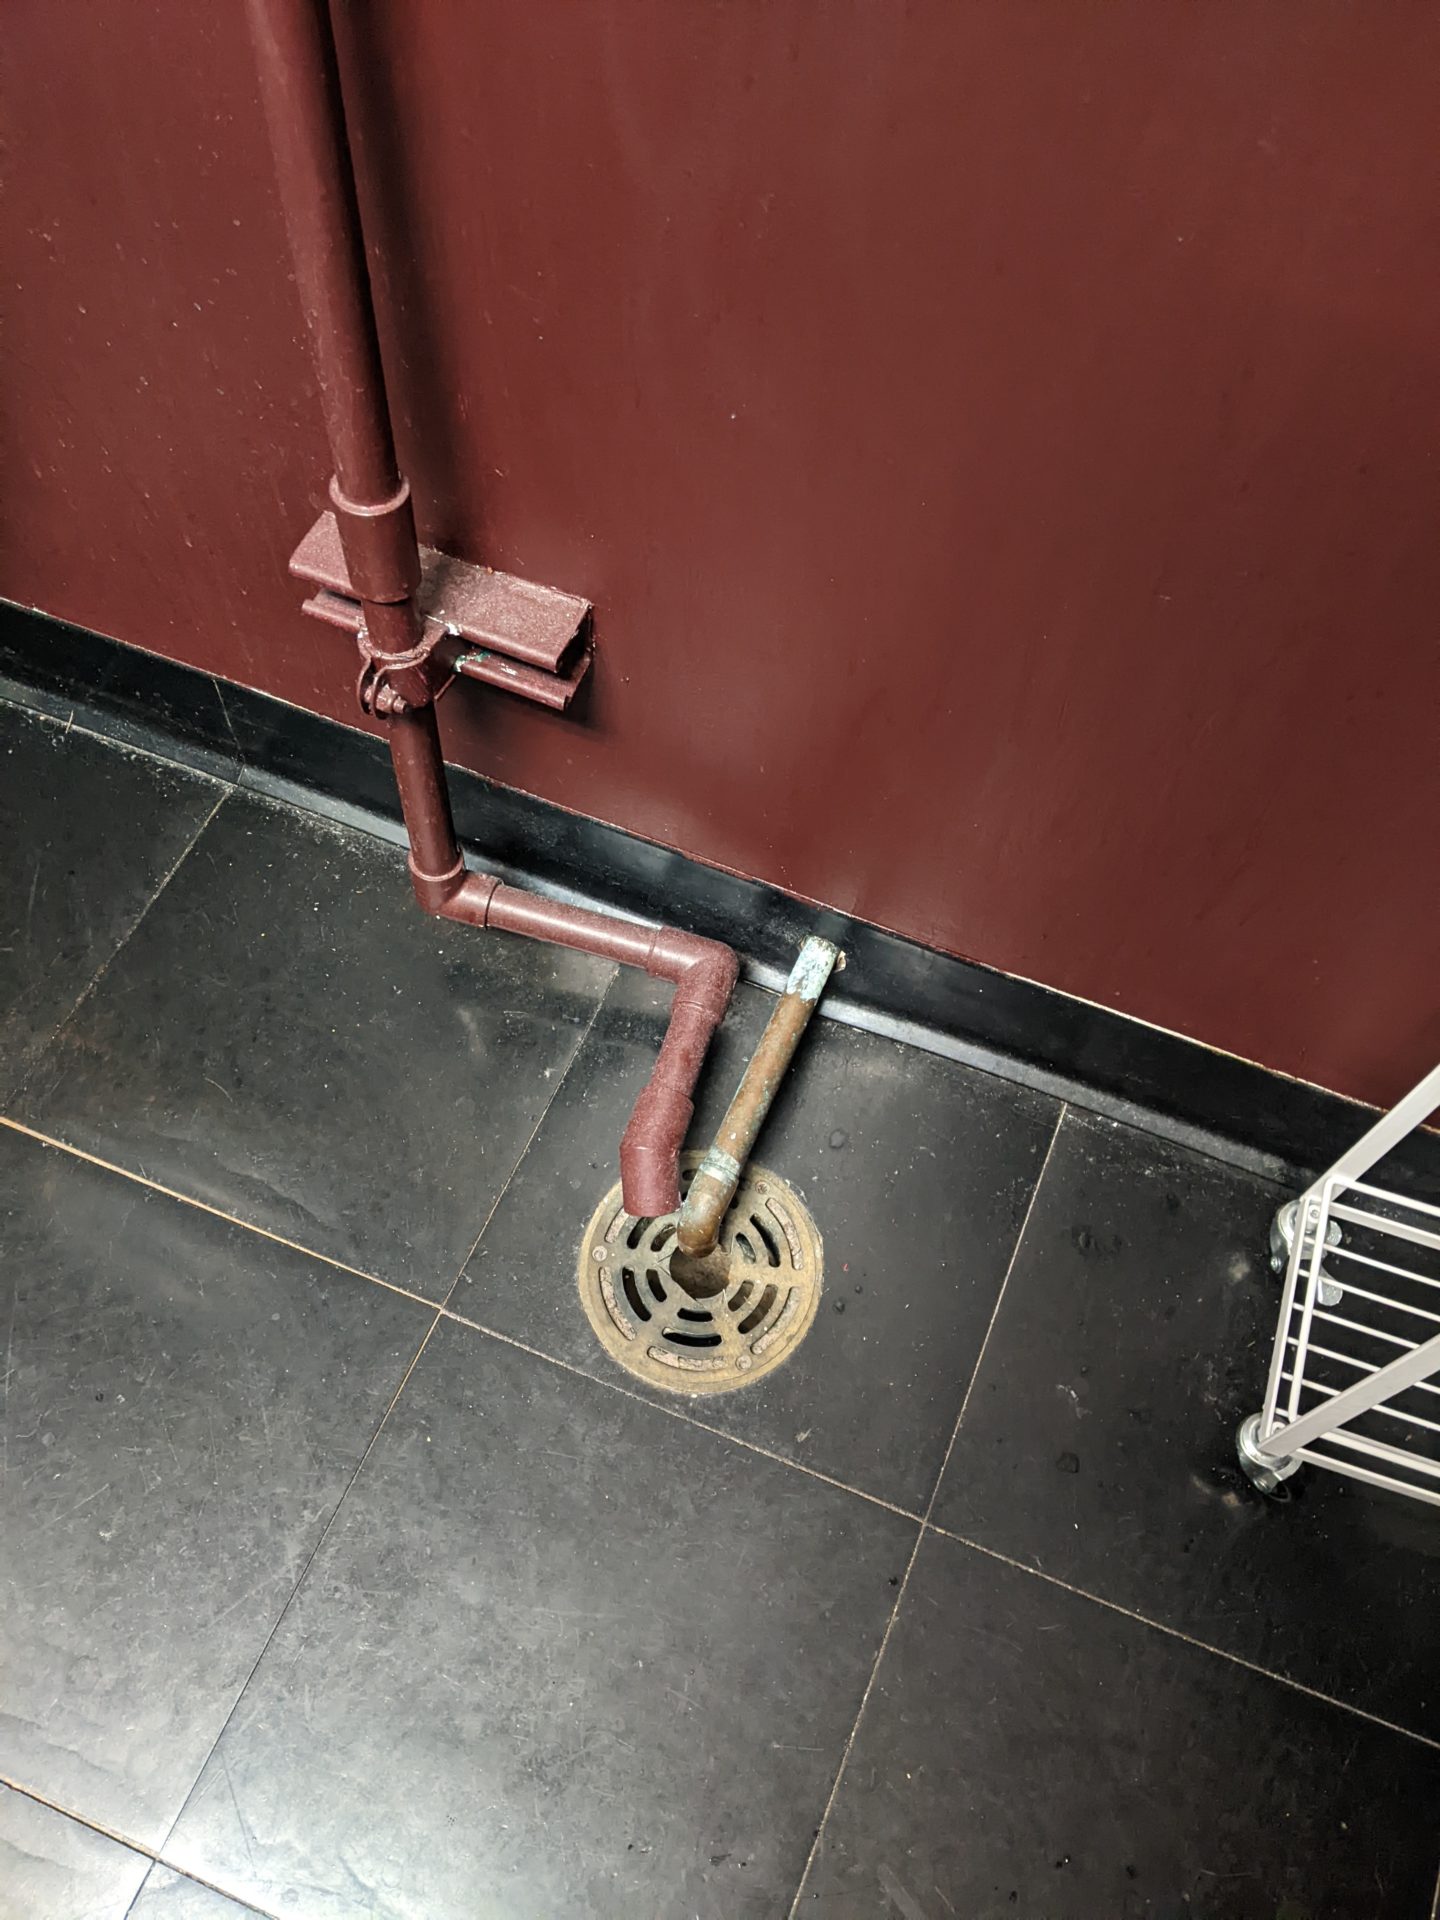 A circular drain is built into a black tiled floor. Two pipes lead into the drain.